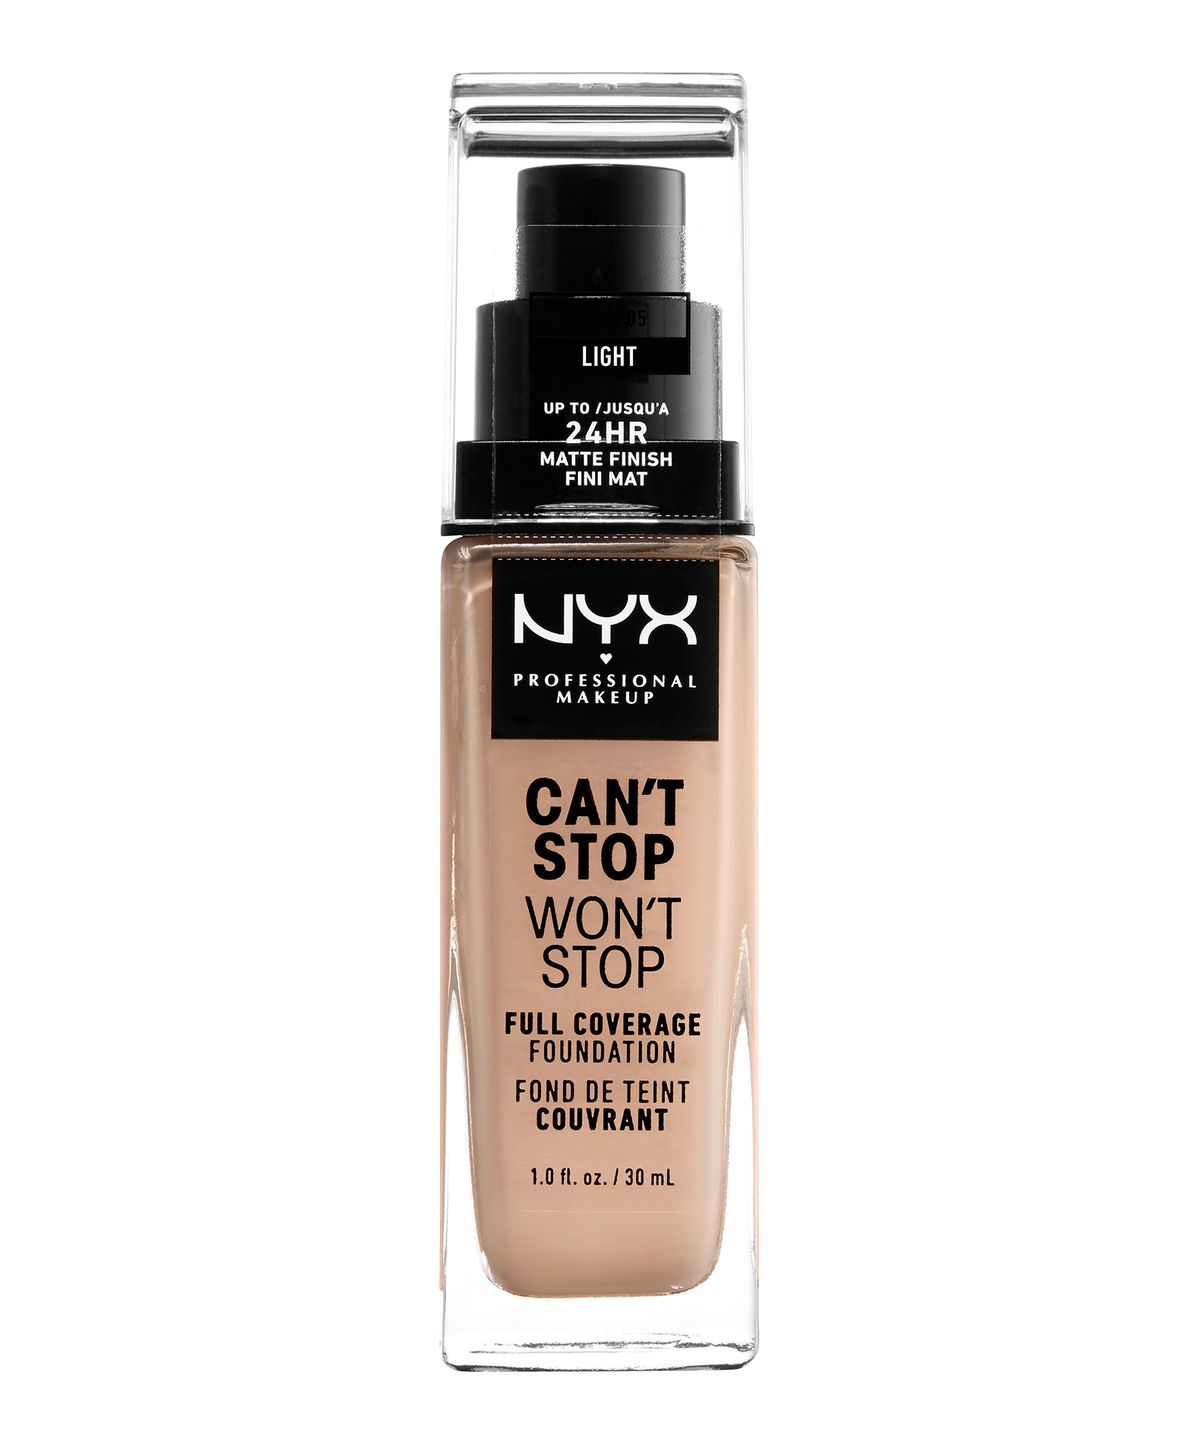 CANT STOP WONT STOP 24HR FOUNDATION LIGHT - NYX PROFESSIONAL MAKEUP